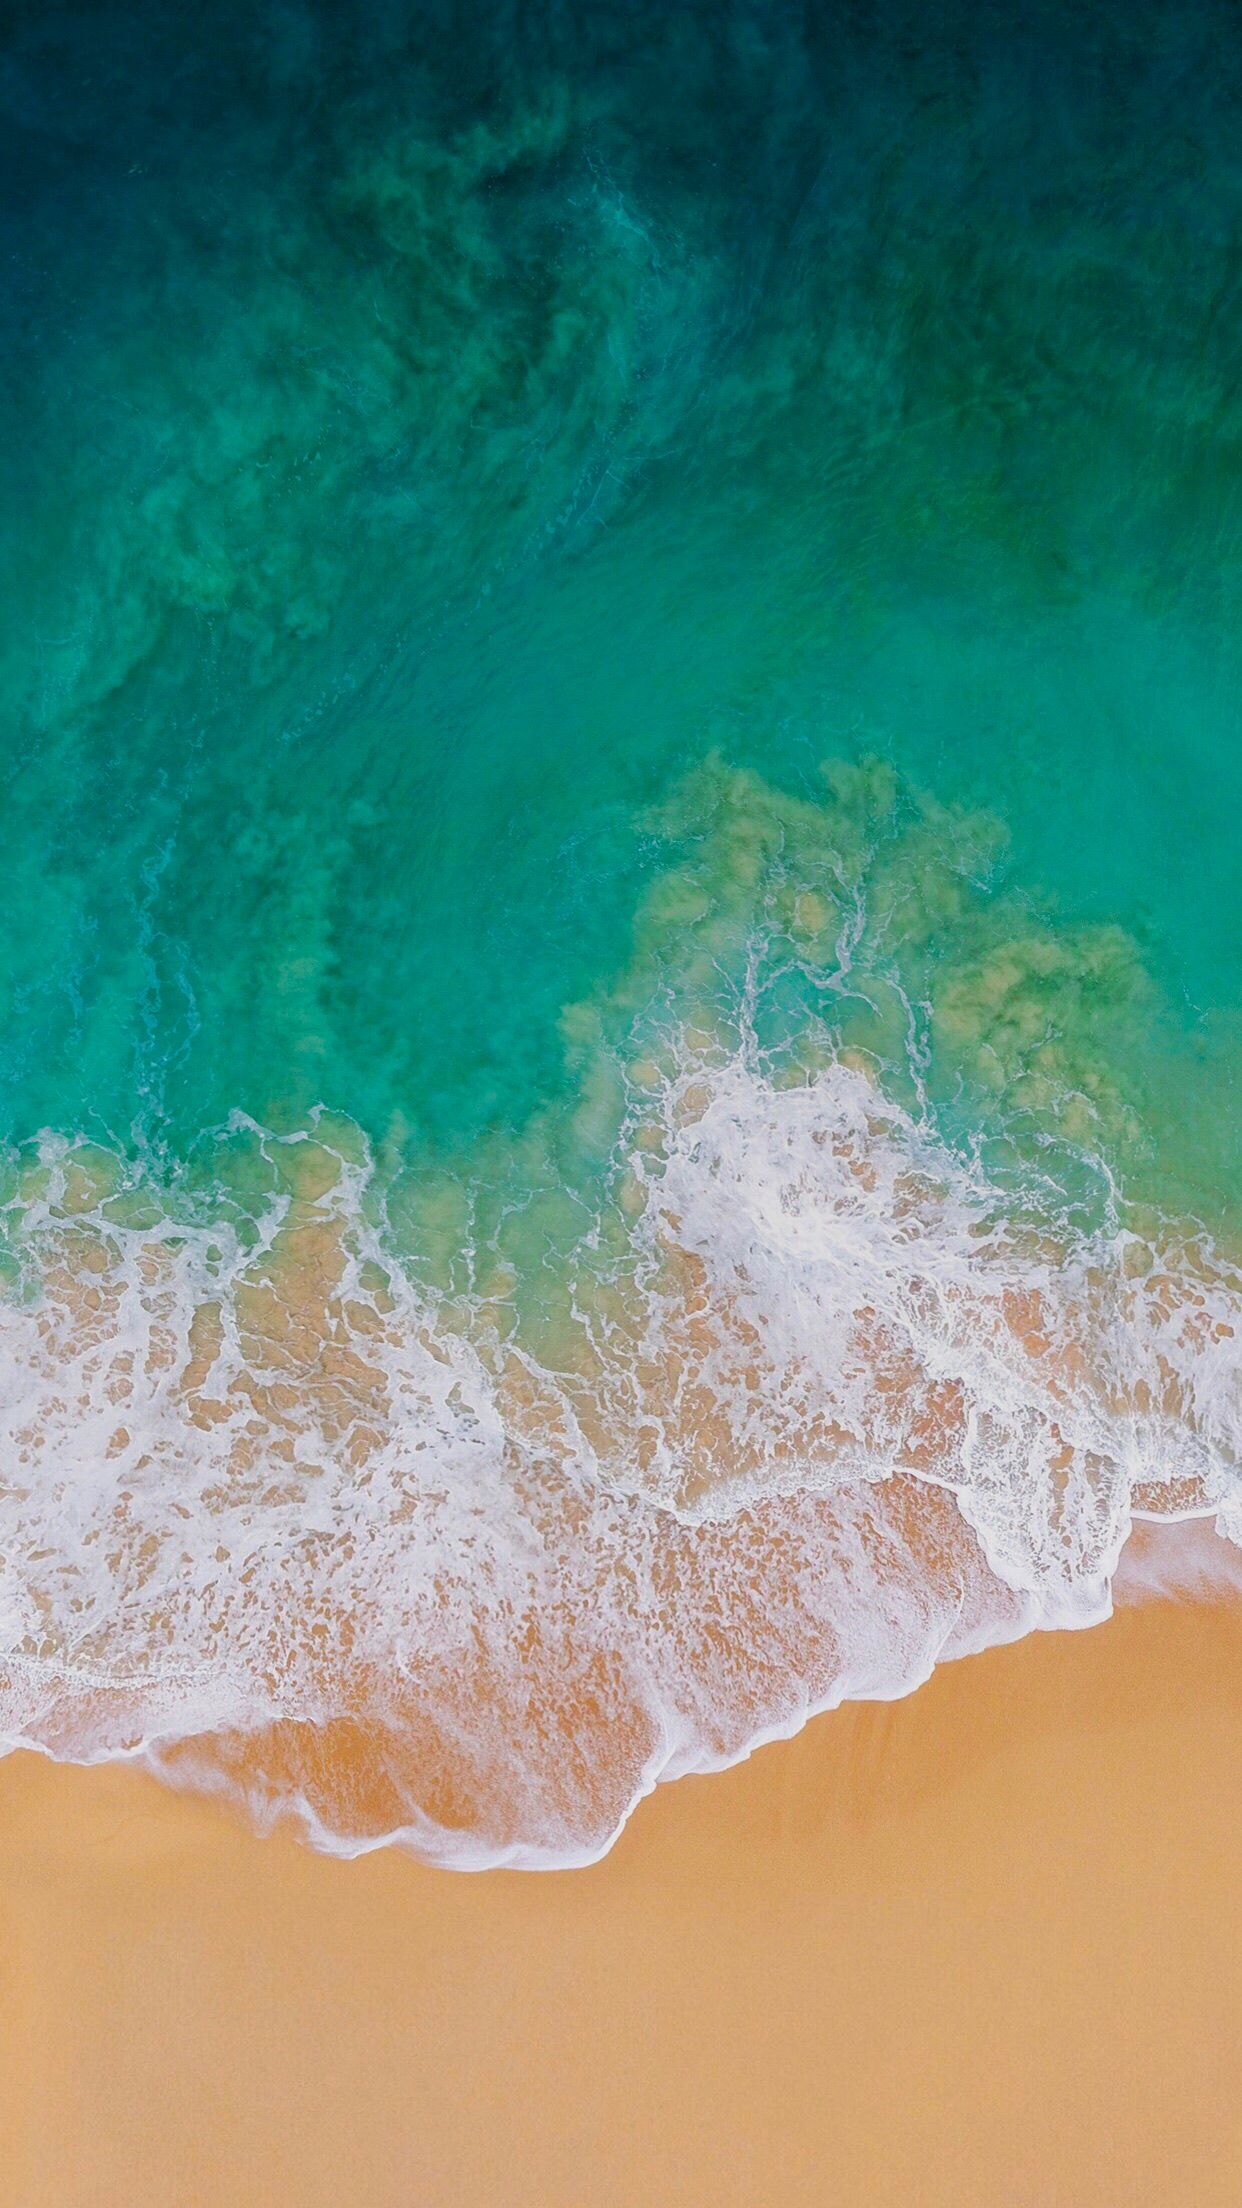 Download And Install The iOS 11 Wallpaper For iPhone, iPad